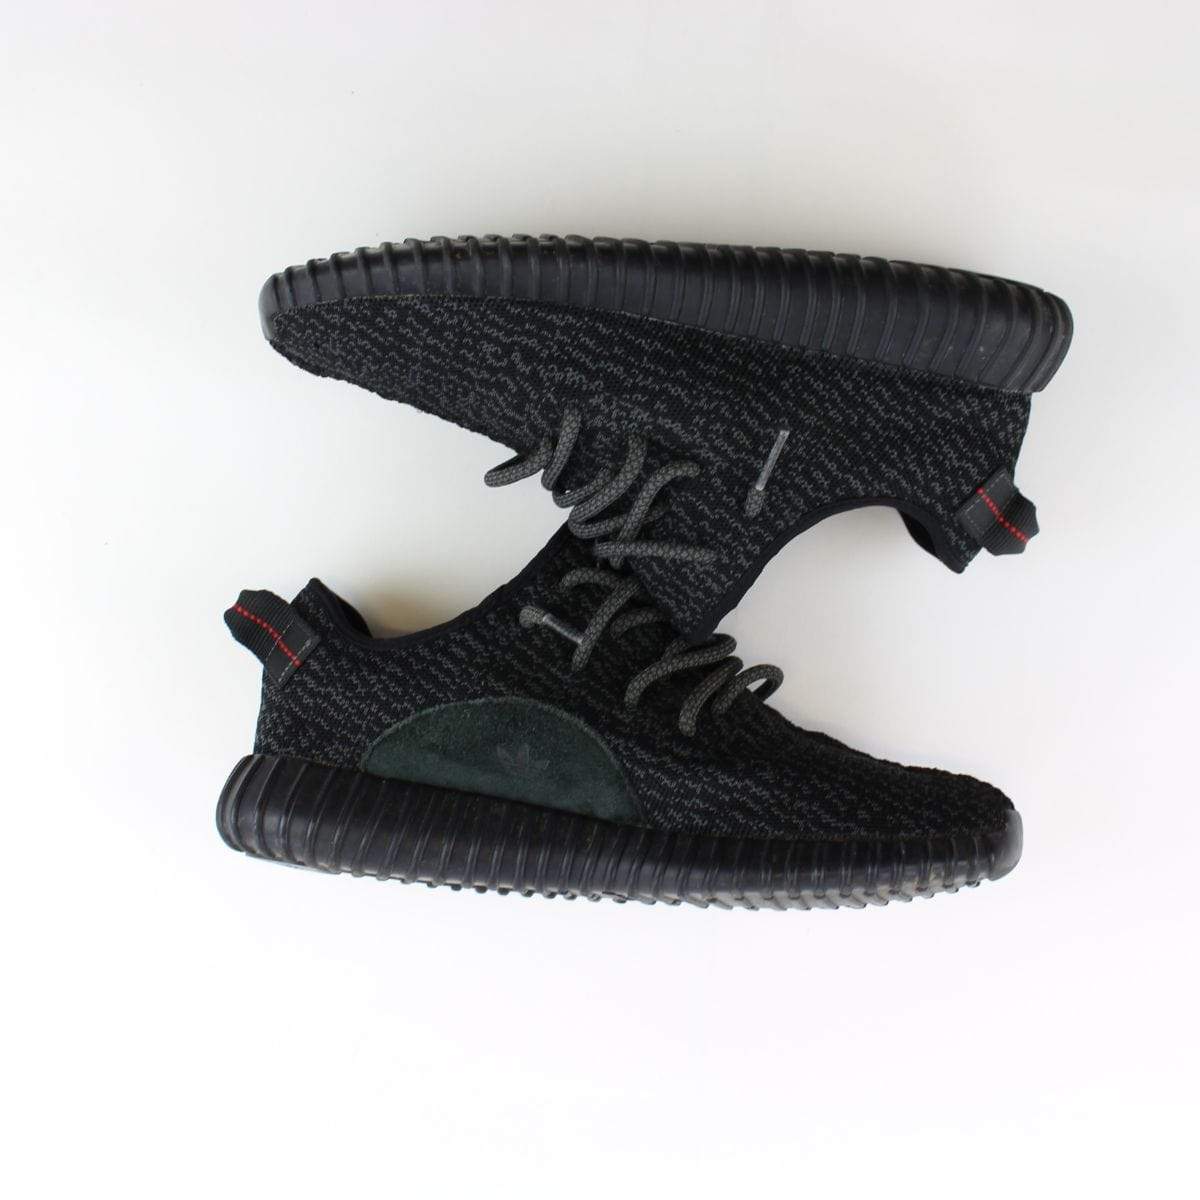 Adidas x Yeezy 350 Boost Pirate Black - SaruGeneral